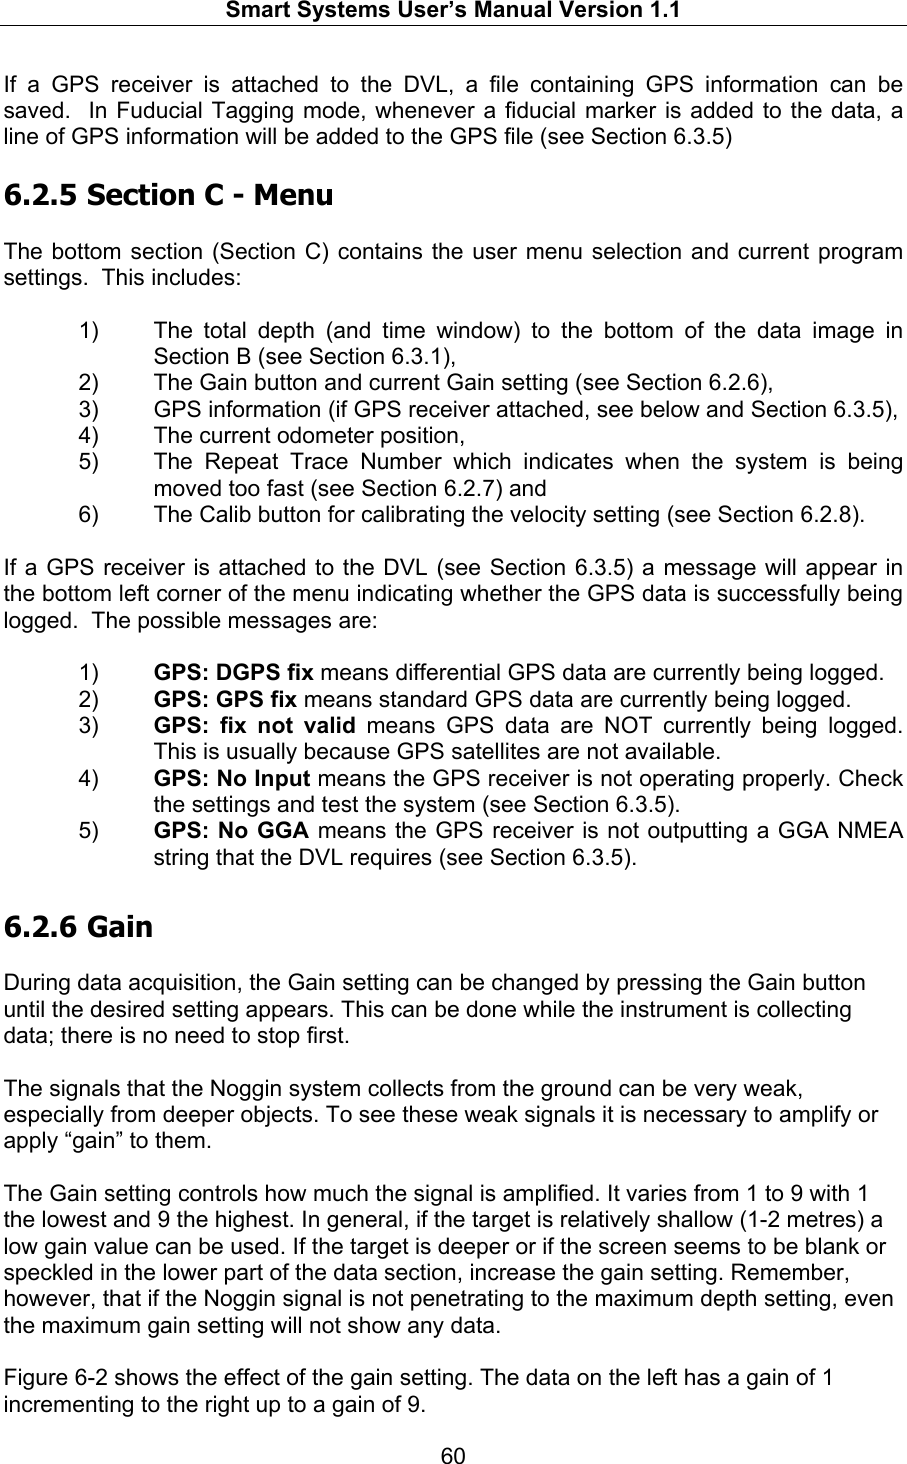   Smart Systems User’s Manual Version 1.1  60  If a GPS receiver is attached to the DVL, a file containing GPS information can be saved.  In Fuducial Tagging mode, whenever a fiducial marker is added to the data, a line of GPS information will be added to the GPS file (see Section 6.3.5)  6.2.5  Section C - Menu  The bottom section (Section C) contains the user menu selection and current program settings.  This includes:  1)  The total depth (and time window) to the bottom of the data image in Section B (see Section 6.3.1),  2)  The Gain button and current Gain setting (see Section 6.2.6), 3)  GPS information (if GPS receiver attached, see below and Section 6.3.5), 4)  The current odometer position,  5)  The Repeat Trace Number which indicates when the system is being moved too fast (see Section 6.2.7) and 6)  The Calib button for calibrating the velocity setting (see Section 6.2.8).  If a GPS receiver is attached to the DVL (see Section 6.3.5) a message will appear in the bottom left corner of the menu indicating whether the GPS data is successfully being logged.  The possible messages are:   1)  GPS: DGPS fix means differential GPS data are currently being logged. 2)  GPS: GPS fix means standard GPS data are currently being logged. 3)  GPS: fix not valid means GPS data are NOT currently being logged. This is usually because GPS satellites are not available. 4)  GPS: No Input means the GPS receiver is not operating properly. Check the settings and test the system (see Section 6.3.5). 5)  GPS: No GGA means the GPS receiver is not outputting a GGA NMEA string that the DVL requires (see Section 6.3.5). 6.2.6  Gain  During data acquisition, the Gain setting can be changed by pressing the Gain button until the desired setting appears. This can be done while the instrument is collecting data; there is no need to stop first.  The signals that the Noggin system collects from the ground can be very weak, especially from deeper objects. To see these weak signals it is necessary to amplify or apply “gain” to them.   The Gain setting controls how much the signal is amplified. It varies from 1 to 9 with 1 the lowest and 9 the highest. In general, if the target is relatively shallow (1-2 metres) a low gain value can be used. If the target is deeper or if the screen seems to be blank or speckled in the lower part of the data section, increase the gain setting. Remember, however, that if the Noggin signal is not penetrating to the maximum depth setting, even the maximum gain setting will not show any data.  Figure 6-2 shows the effect of the gain setting. The data on the left has a gain of 1 incrementing to the right up to a gain of 9. 